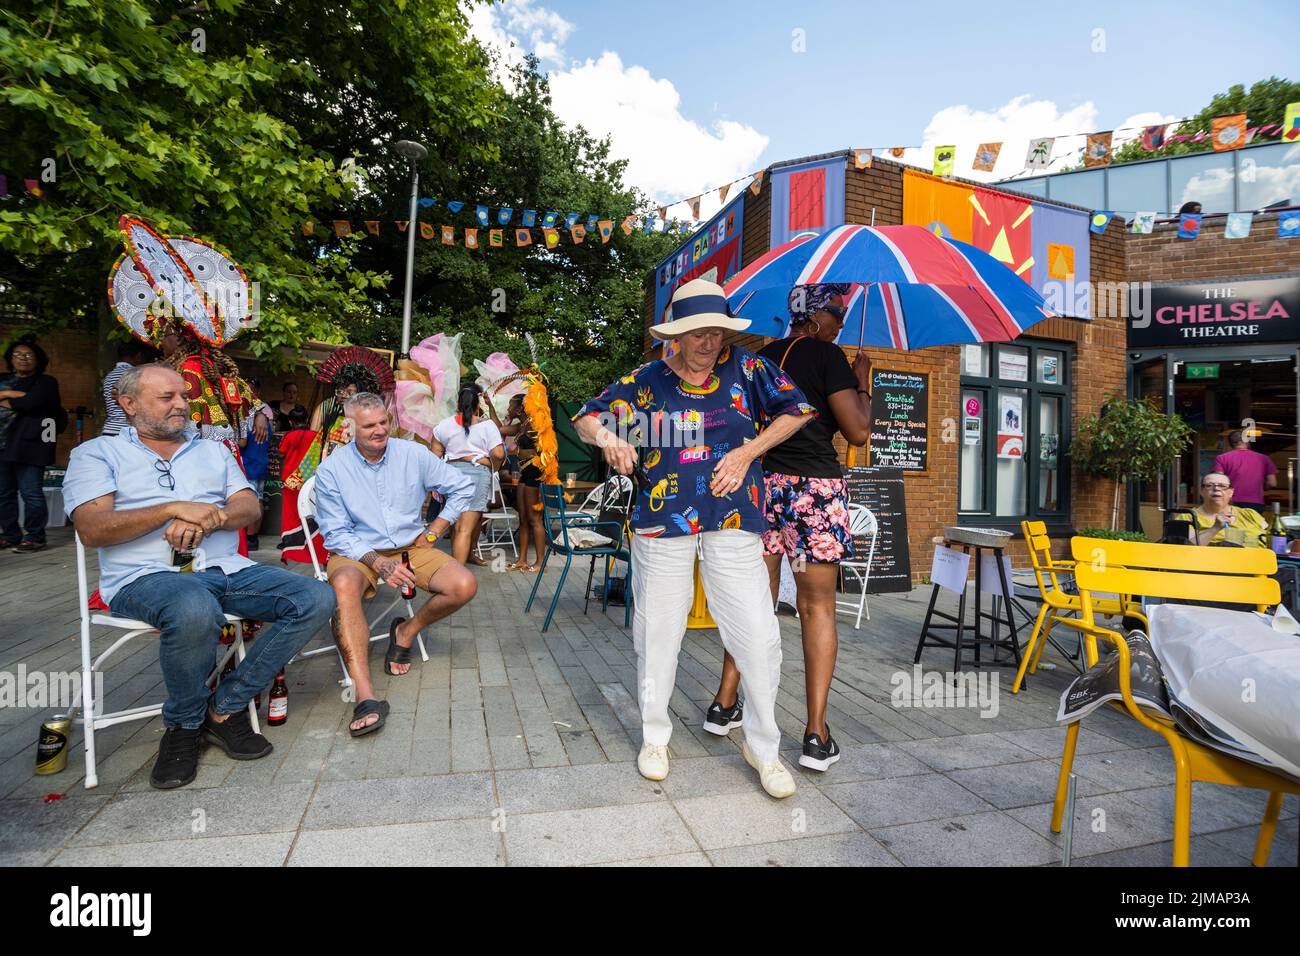 London, UK.  5 August 2022. Members of the public at Carnival in Chelsea, an event showcasing carnival costumes, music and culture.  The show is outside The Chelsea Theatre and is part of this year’s Kensington & Chelsea Festival. Credit: Stephen Chung / Alamy Live News Stock Photo